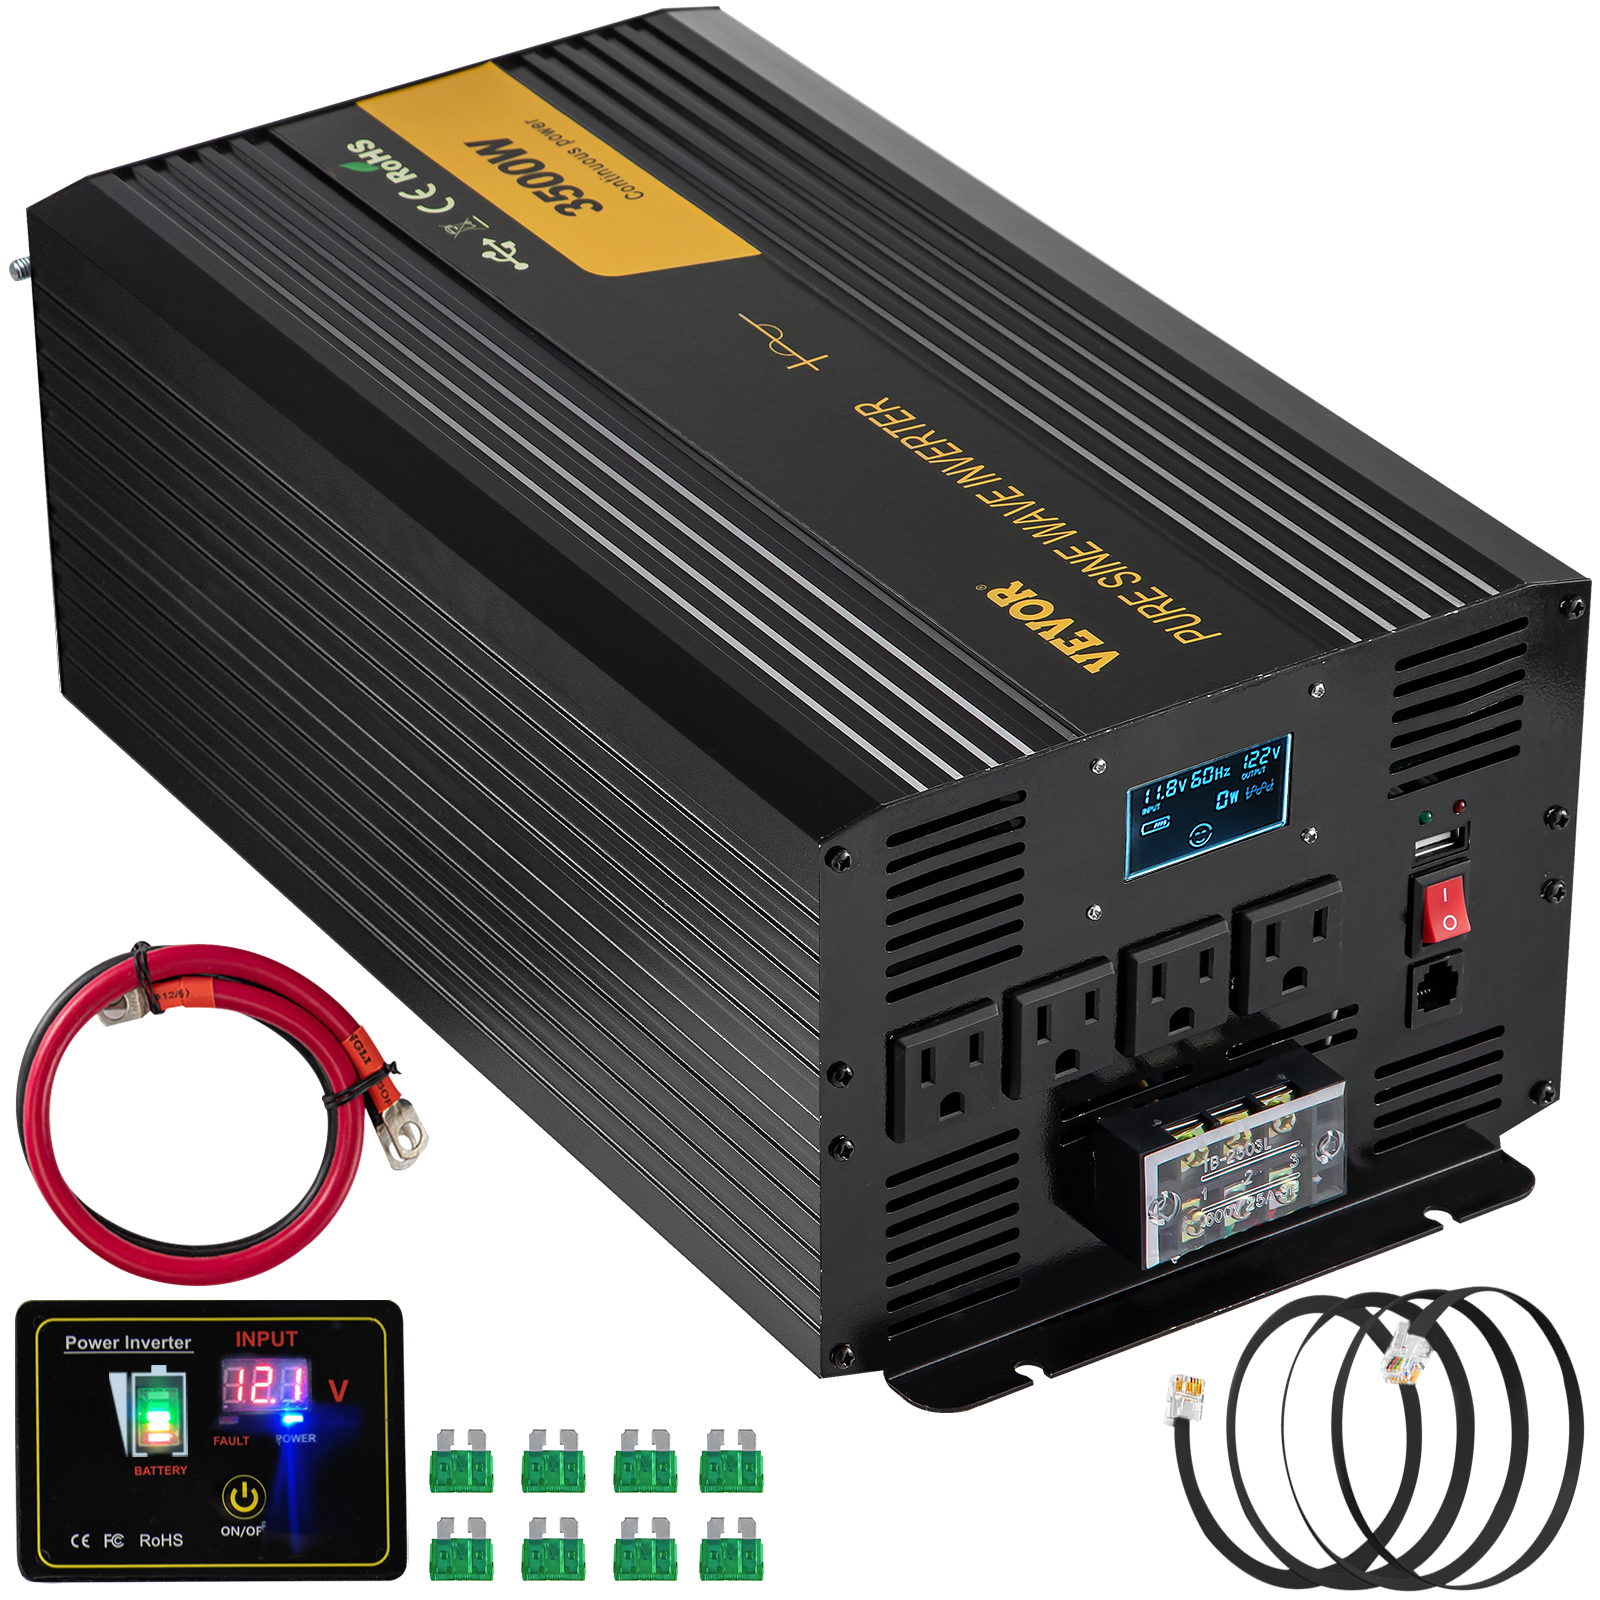 POWER JACK Low frequency pure sine wave inverter user manual PDF 